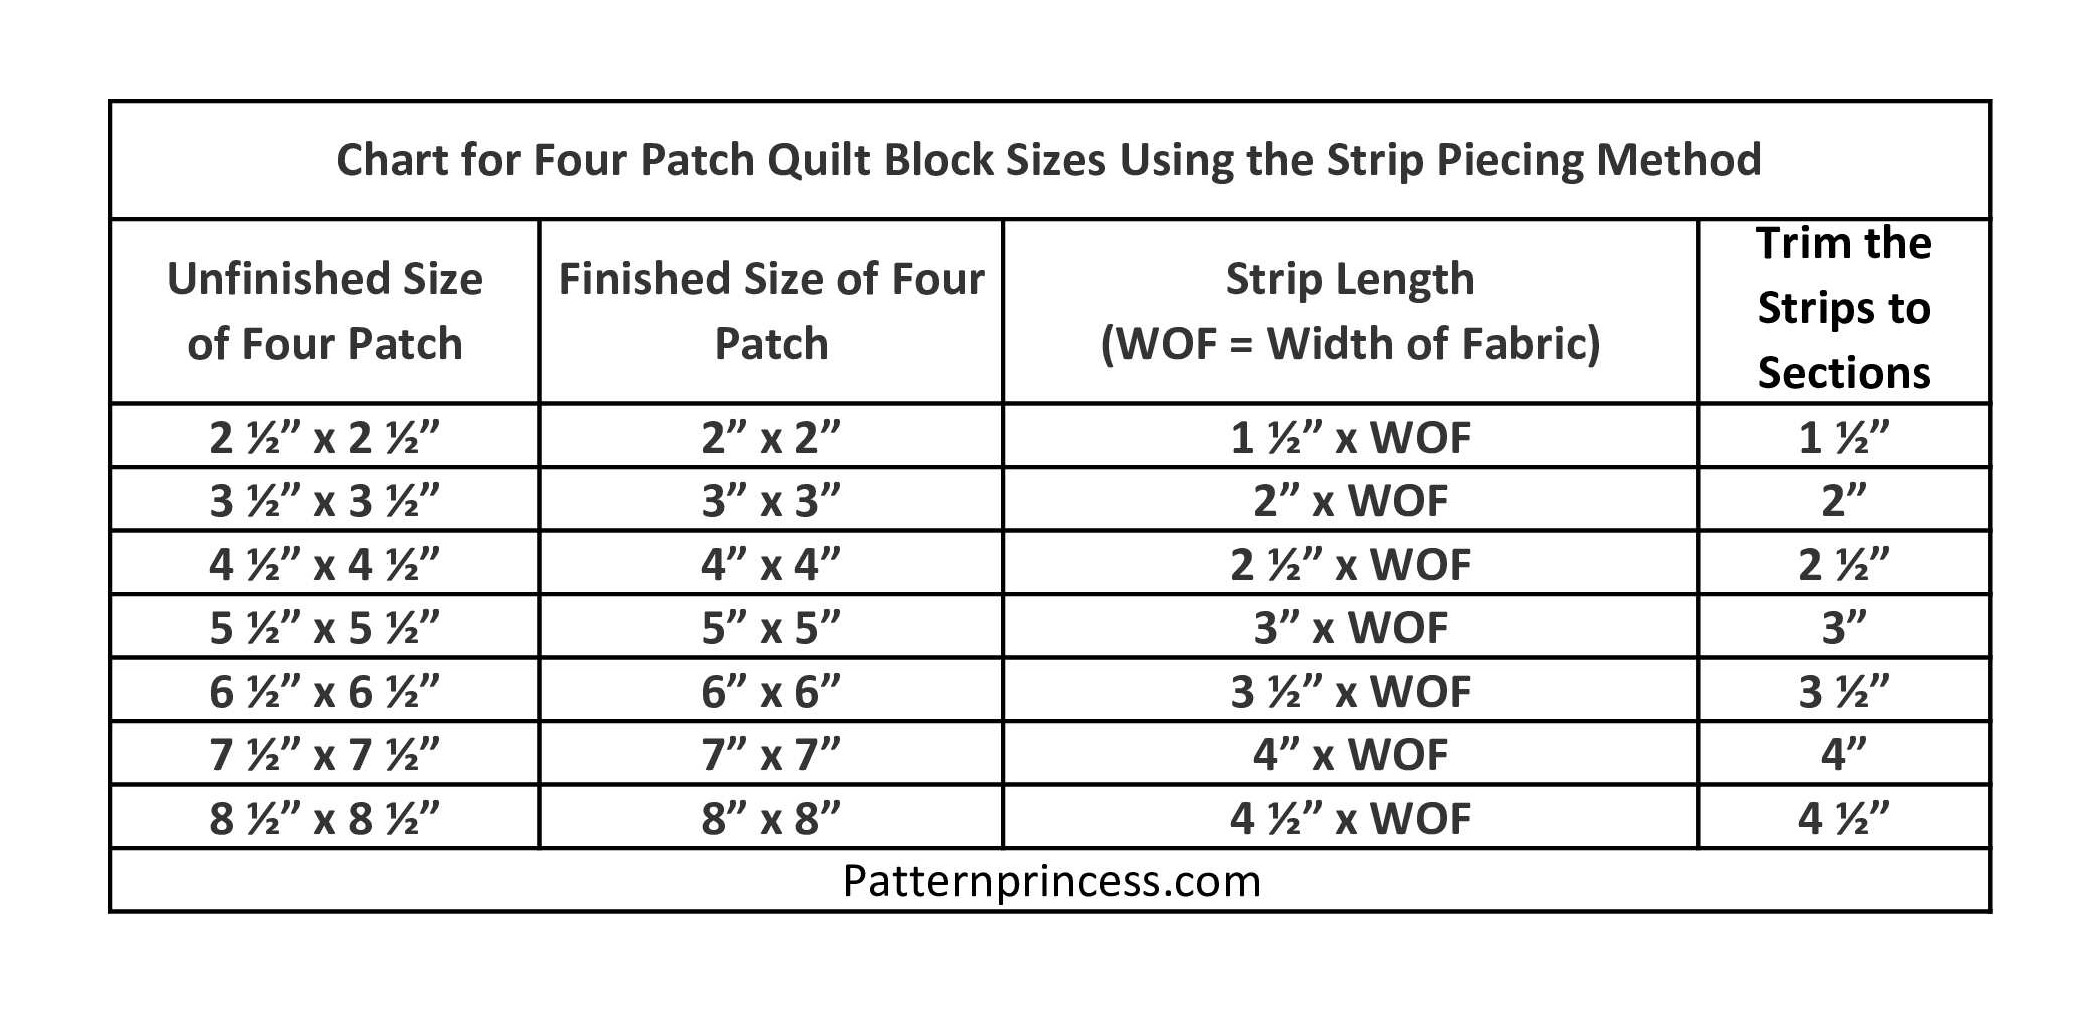 Chart for Four Patch Quilt Block Sizes Using the Strip Piecing Method